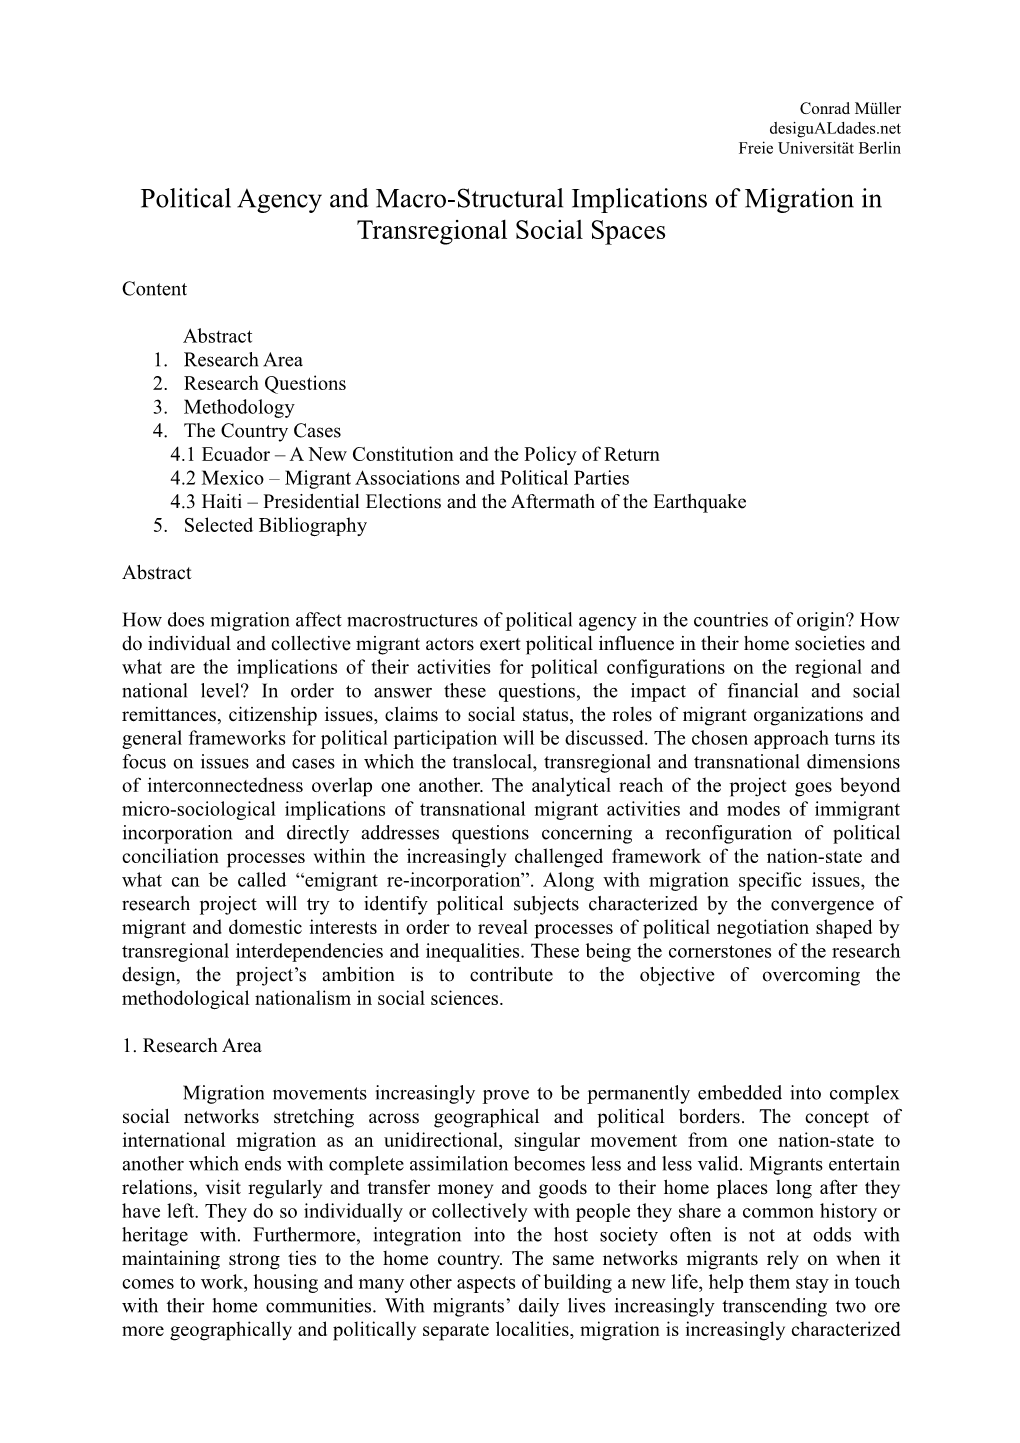 Political Agency and Macro-Structural Implications of Migration in Transregional Social Spaces